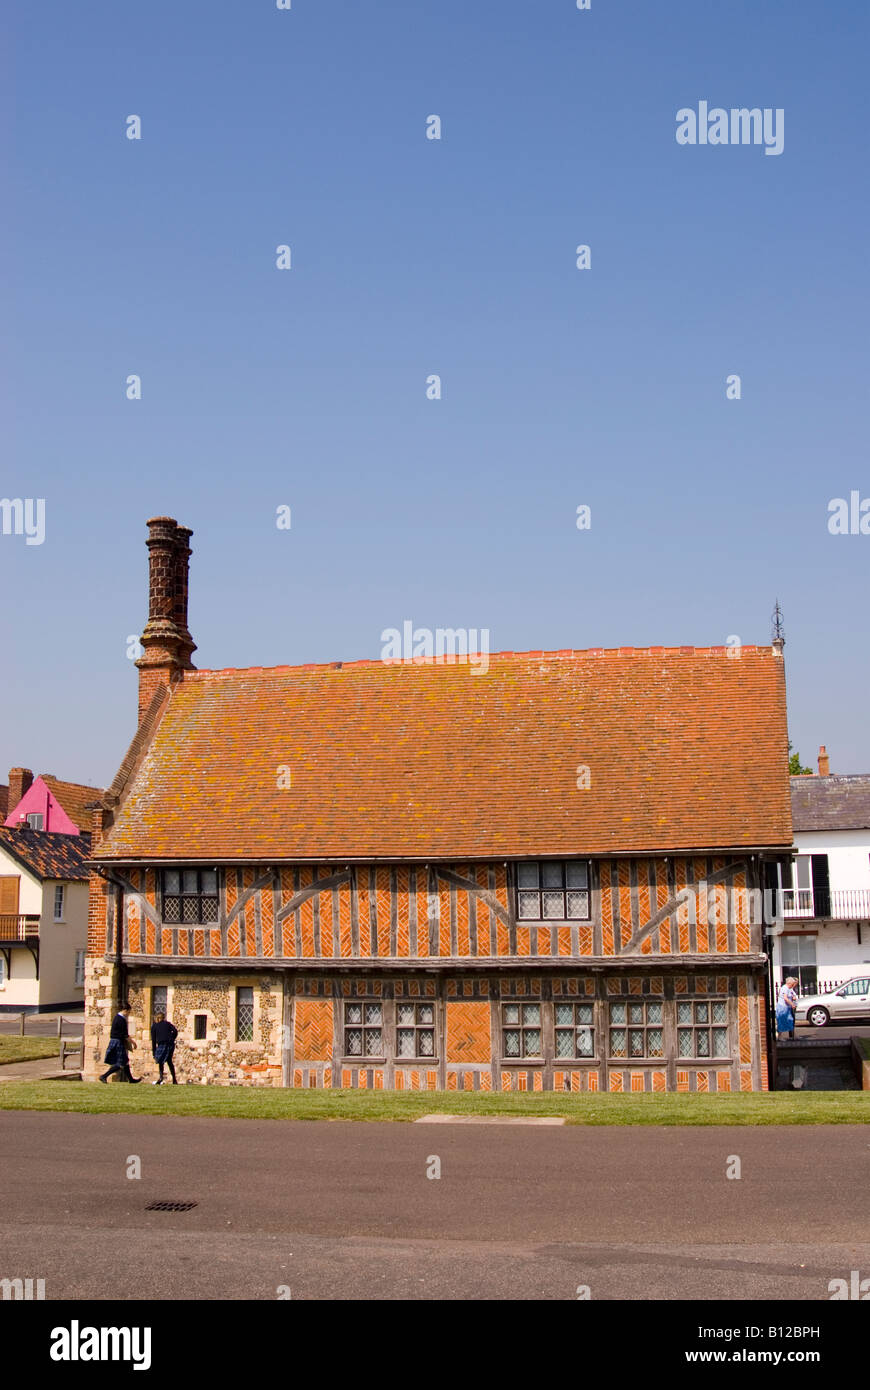 The Moot Hall In Aldeburgh in the uk Stock Photo